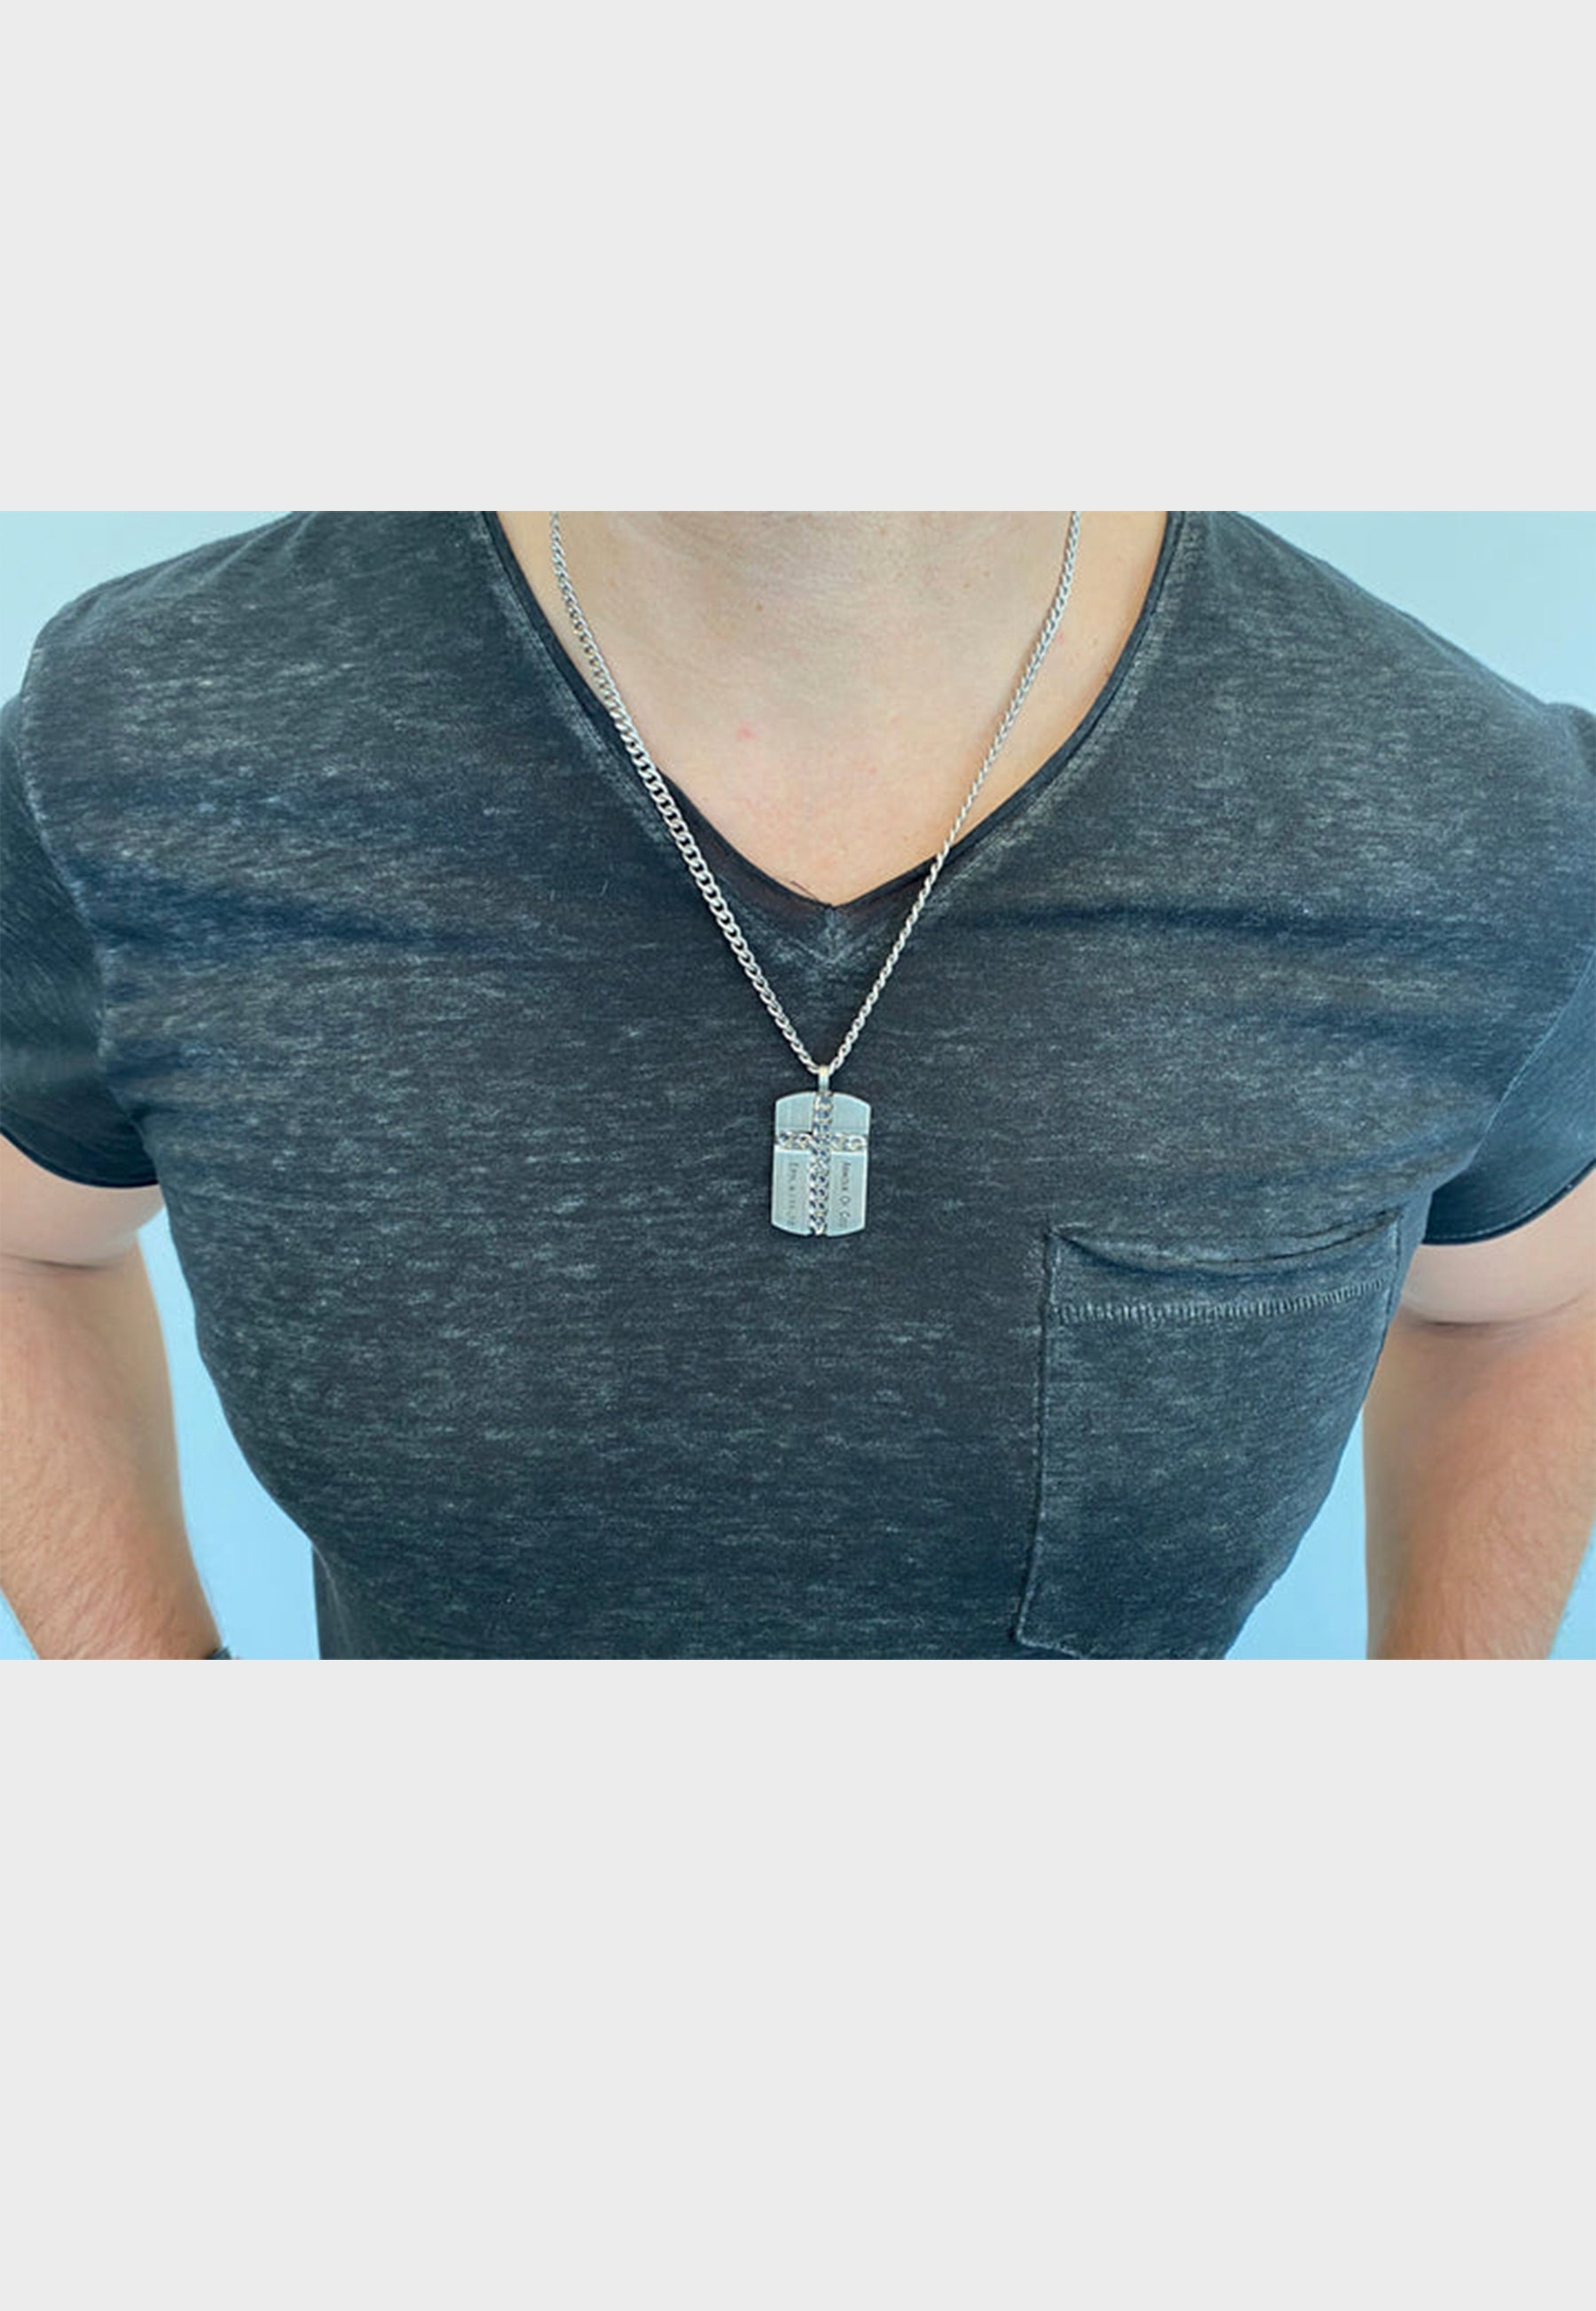 Male model wearing Armor of God necklace Christian jewelry